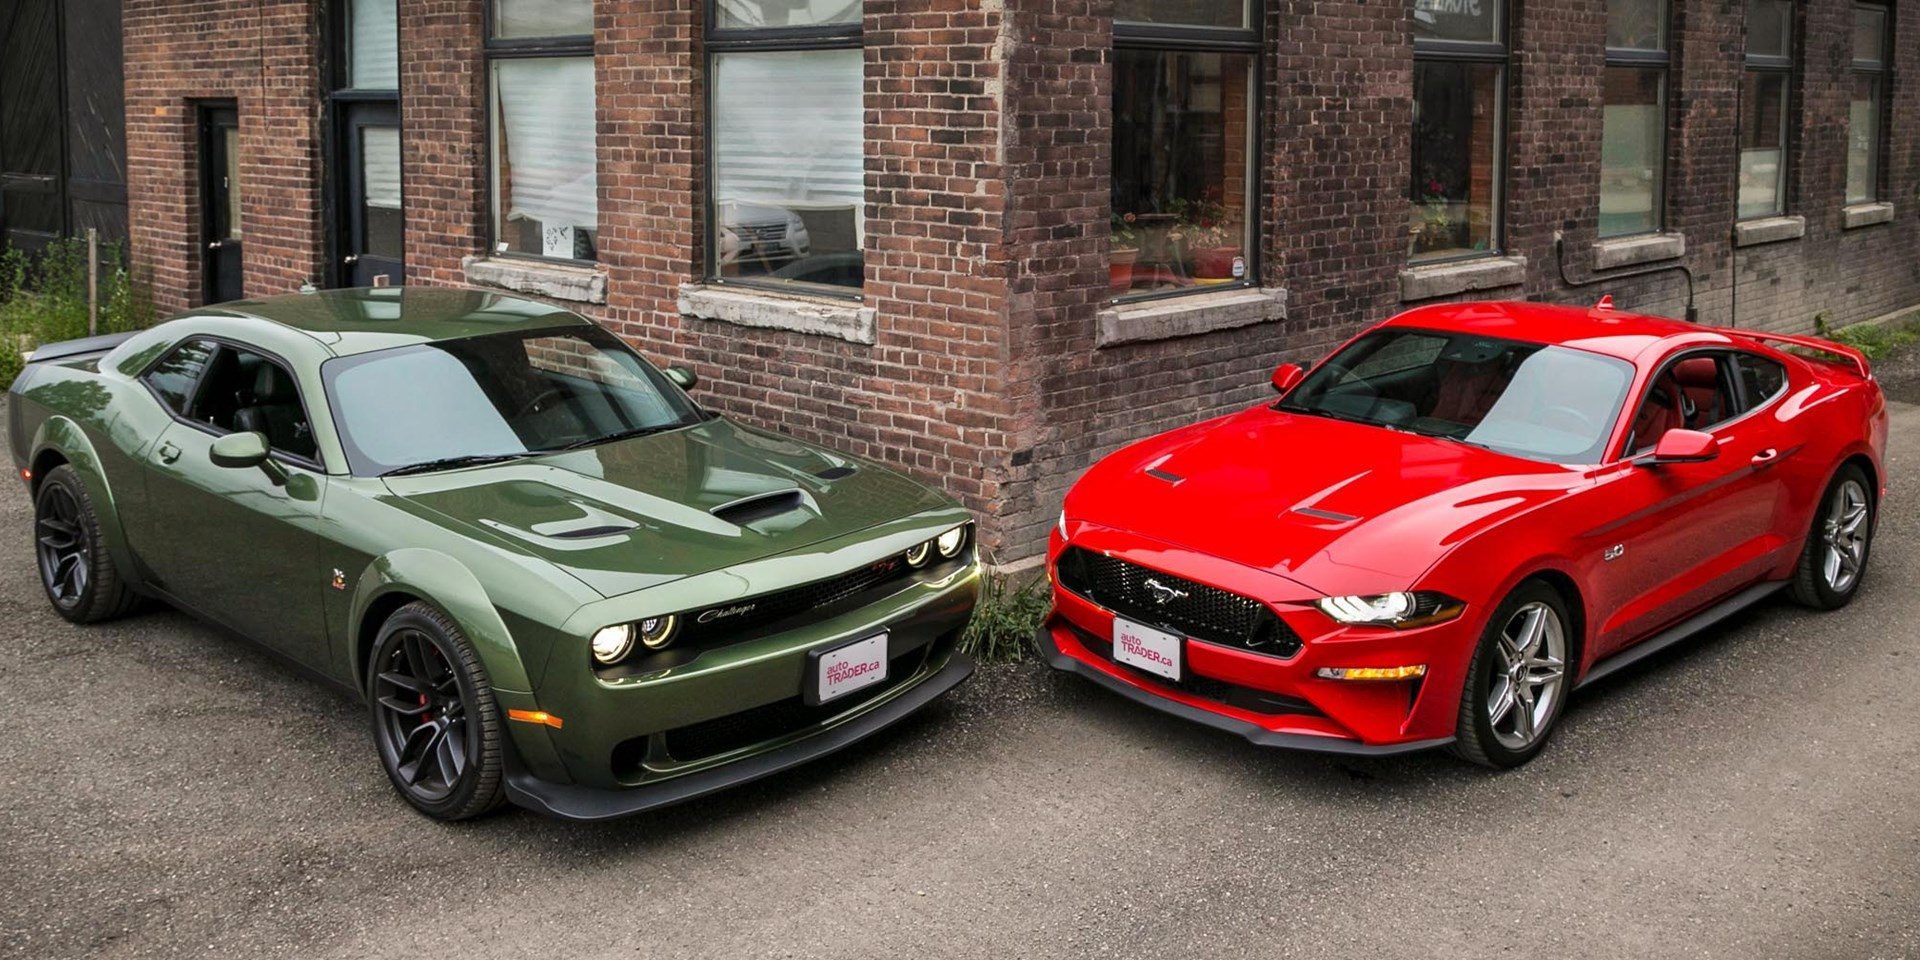 Mustang vs Challenger: 10 Things To Consider Before Buying